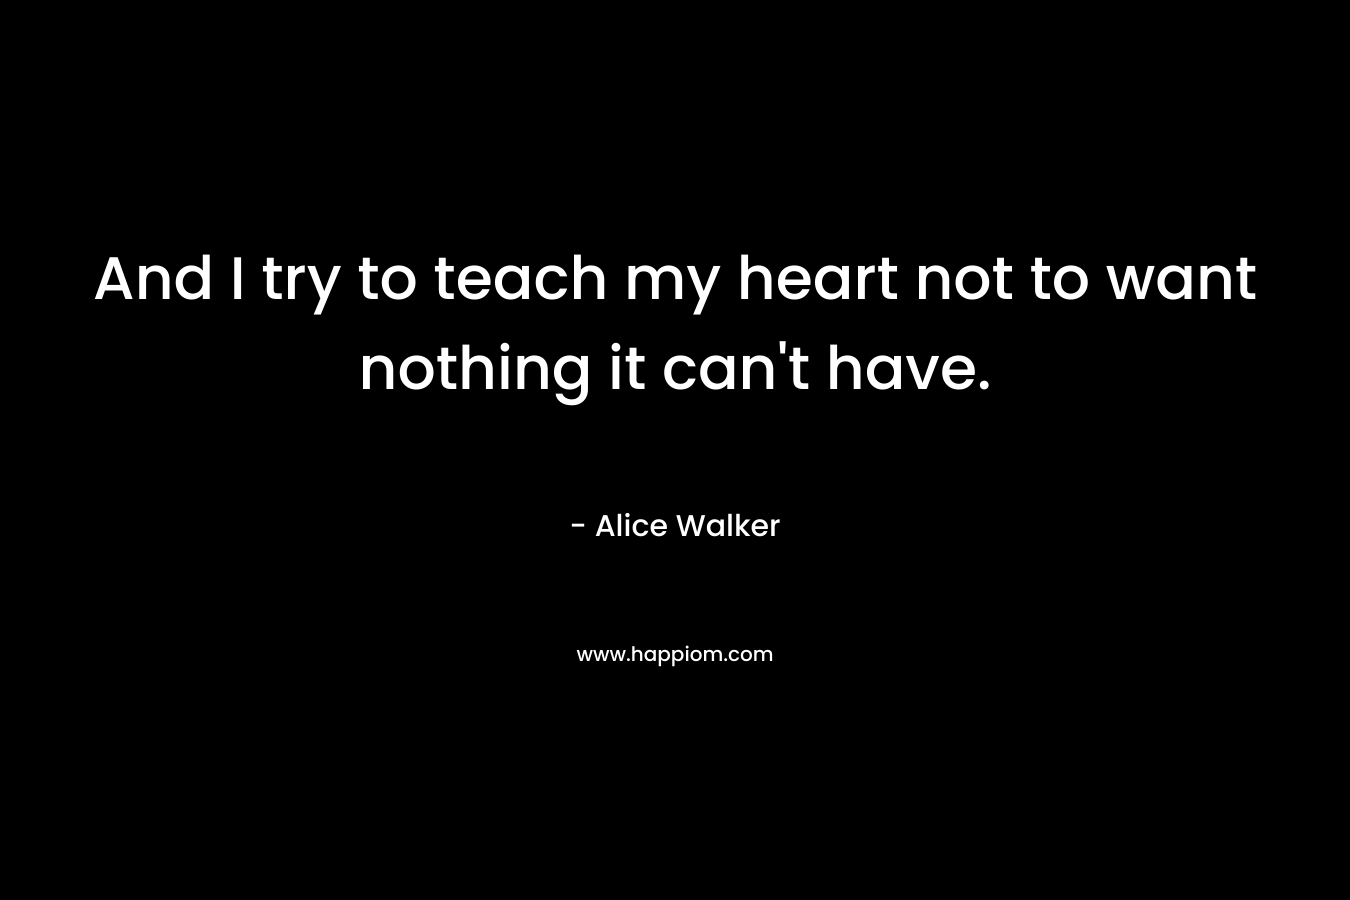 And I try to teach my heart not to want nothing it can't have.